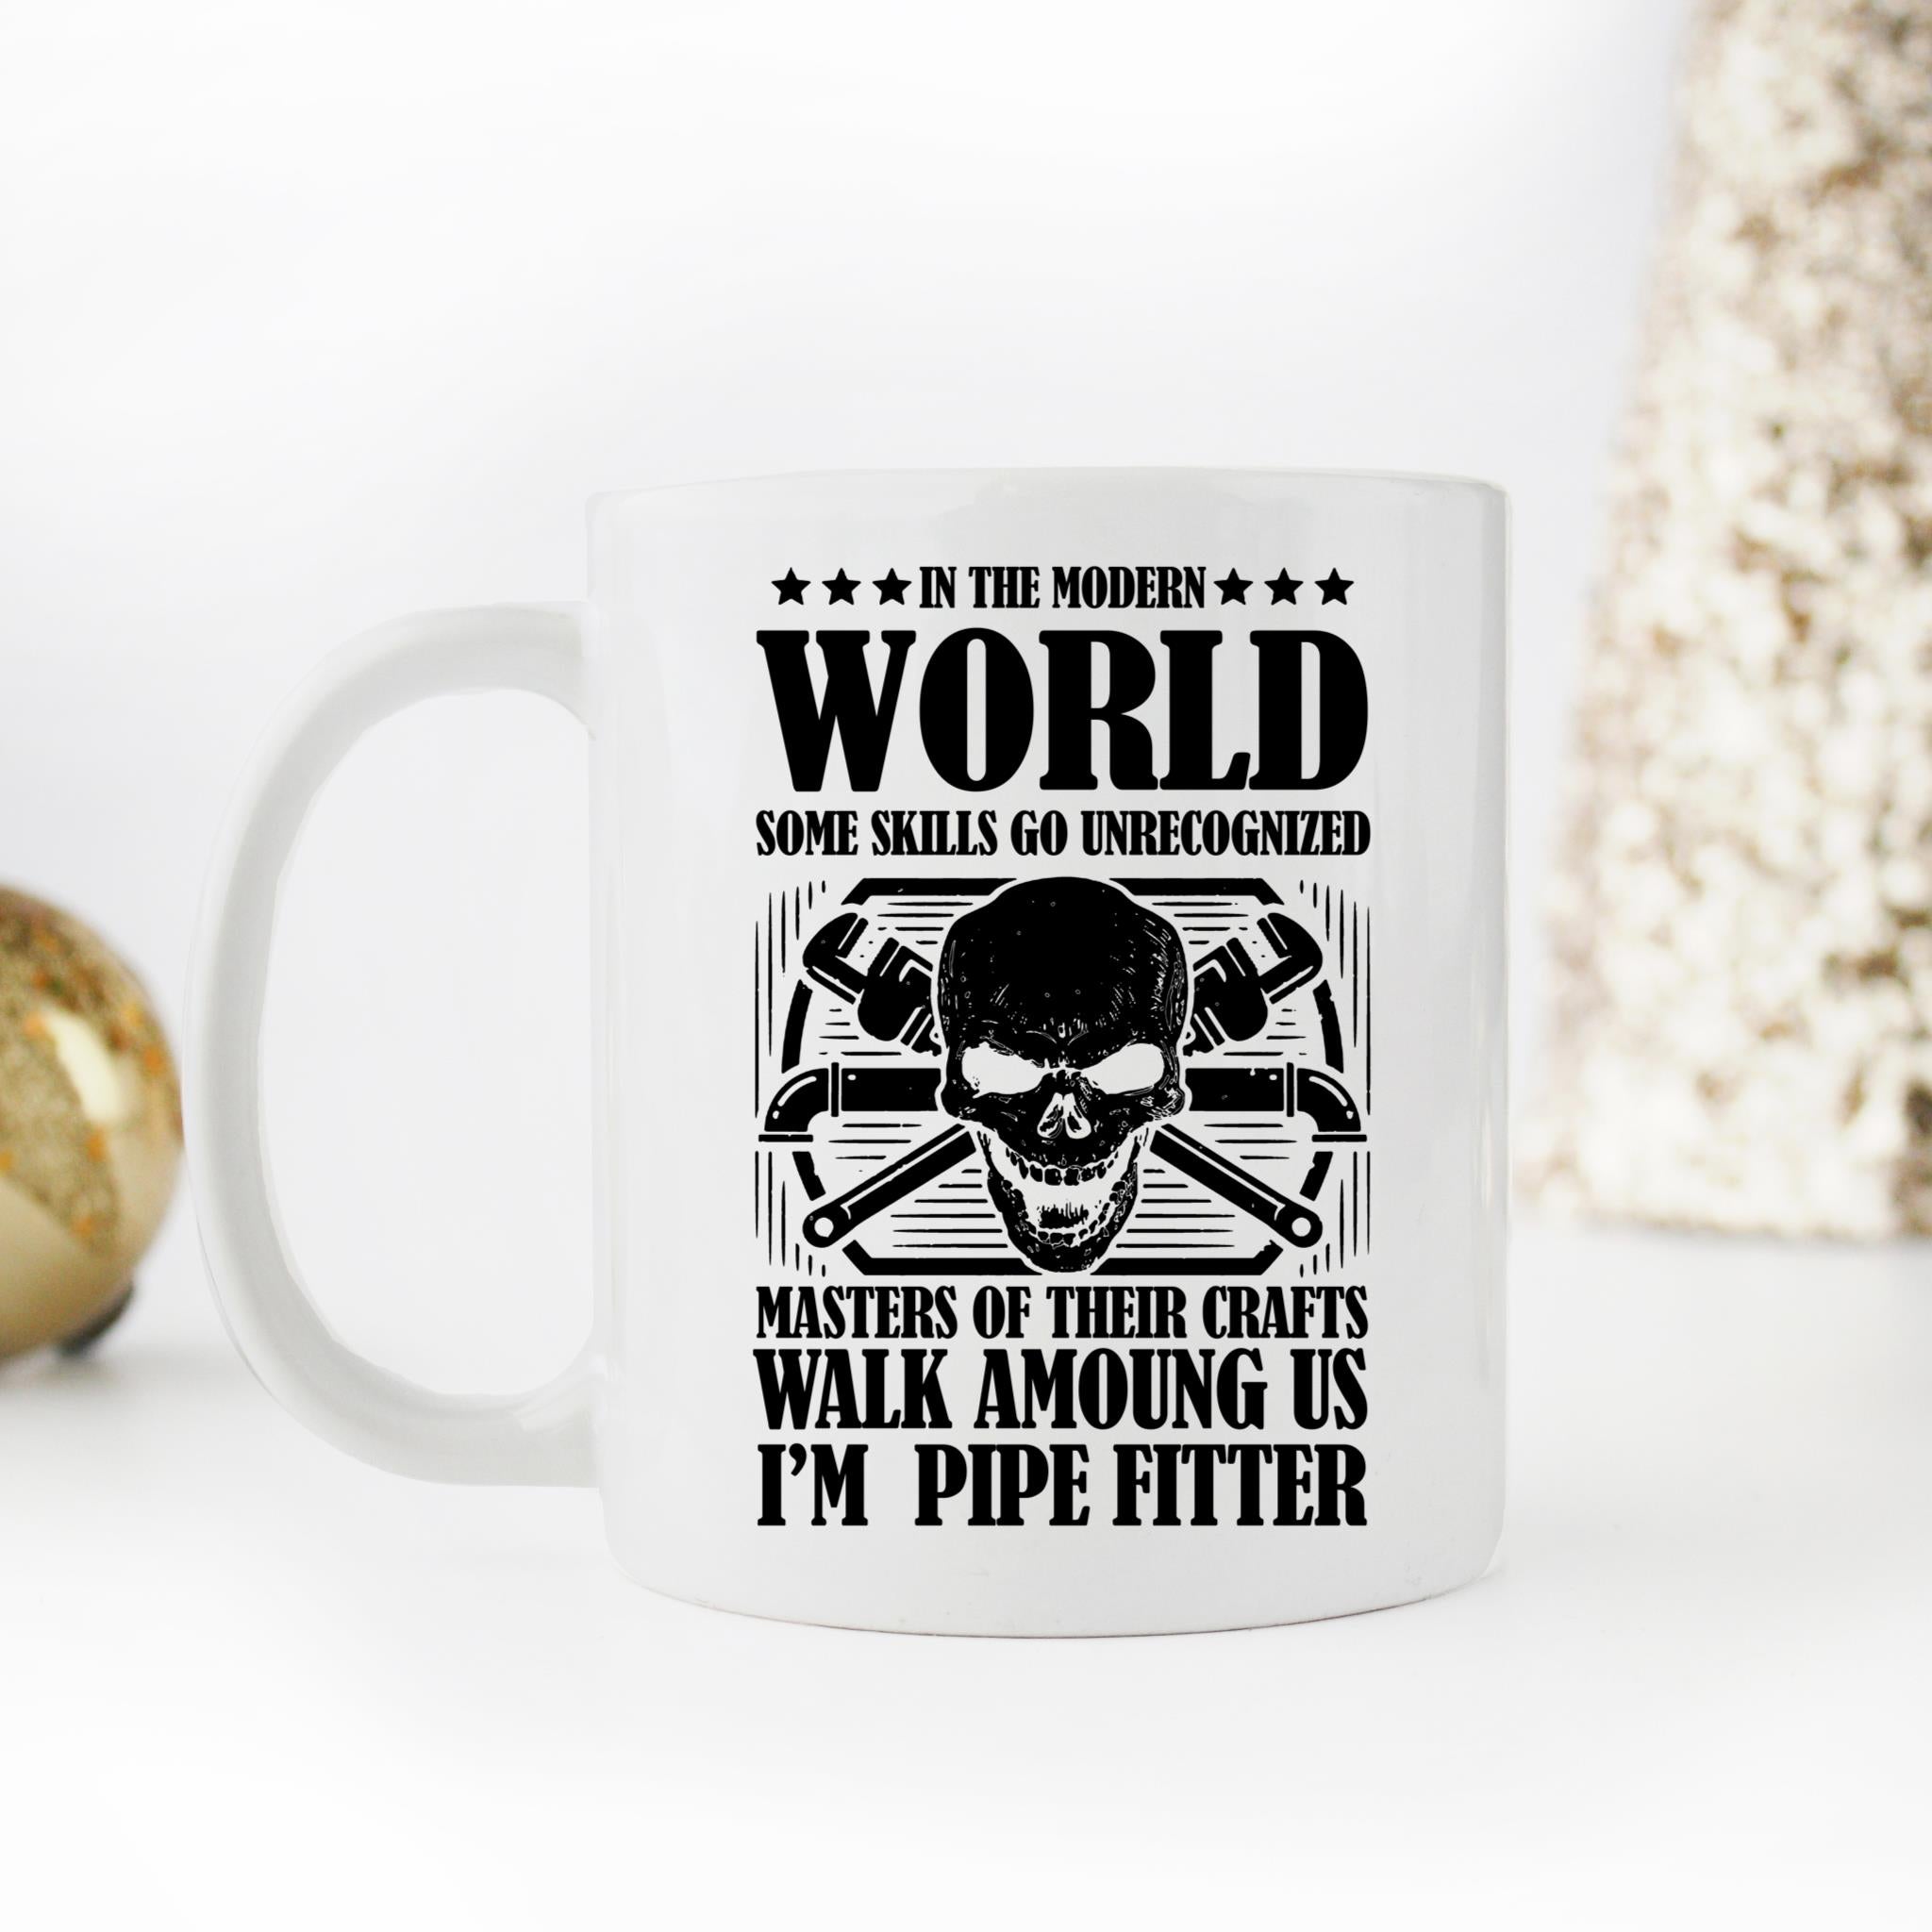 Skitongifts Coffee Mug Funny Ceramic Novelty Masters Of Their Crafts Pipe Fitter caa8GLs